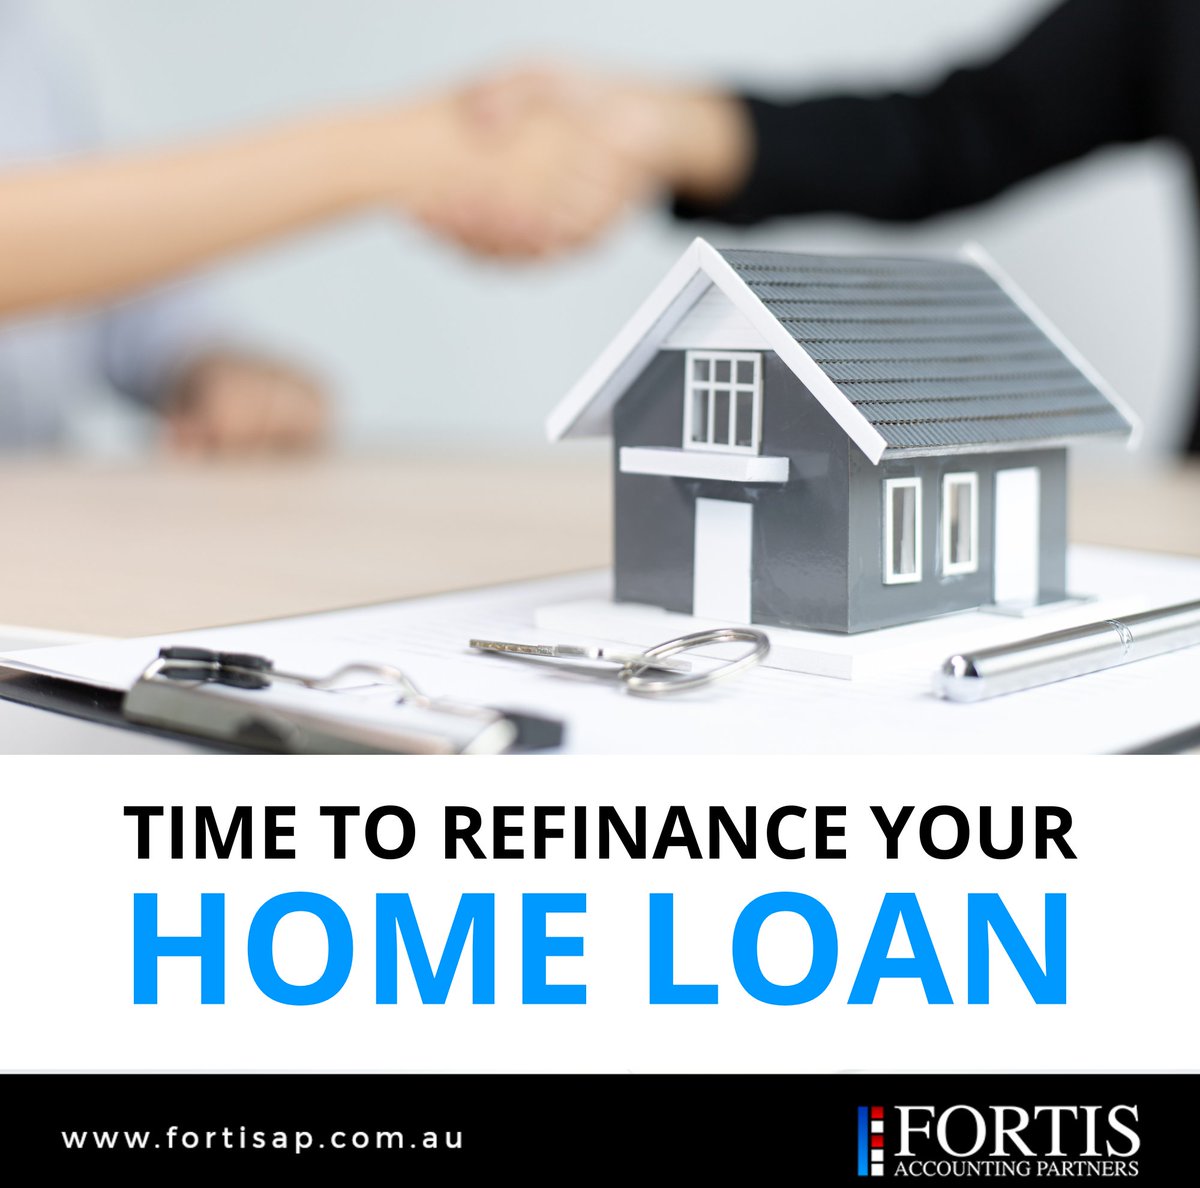 Feeling stuck with a high-interest rate on your home loan? Refinancing could help you secure a lower rate and save you money in the long run

#refinance #lowinterestrates #homesavings #fortisap